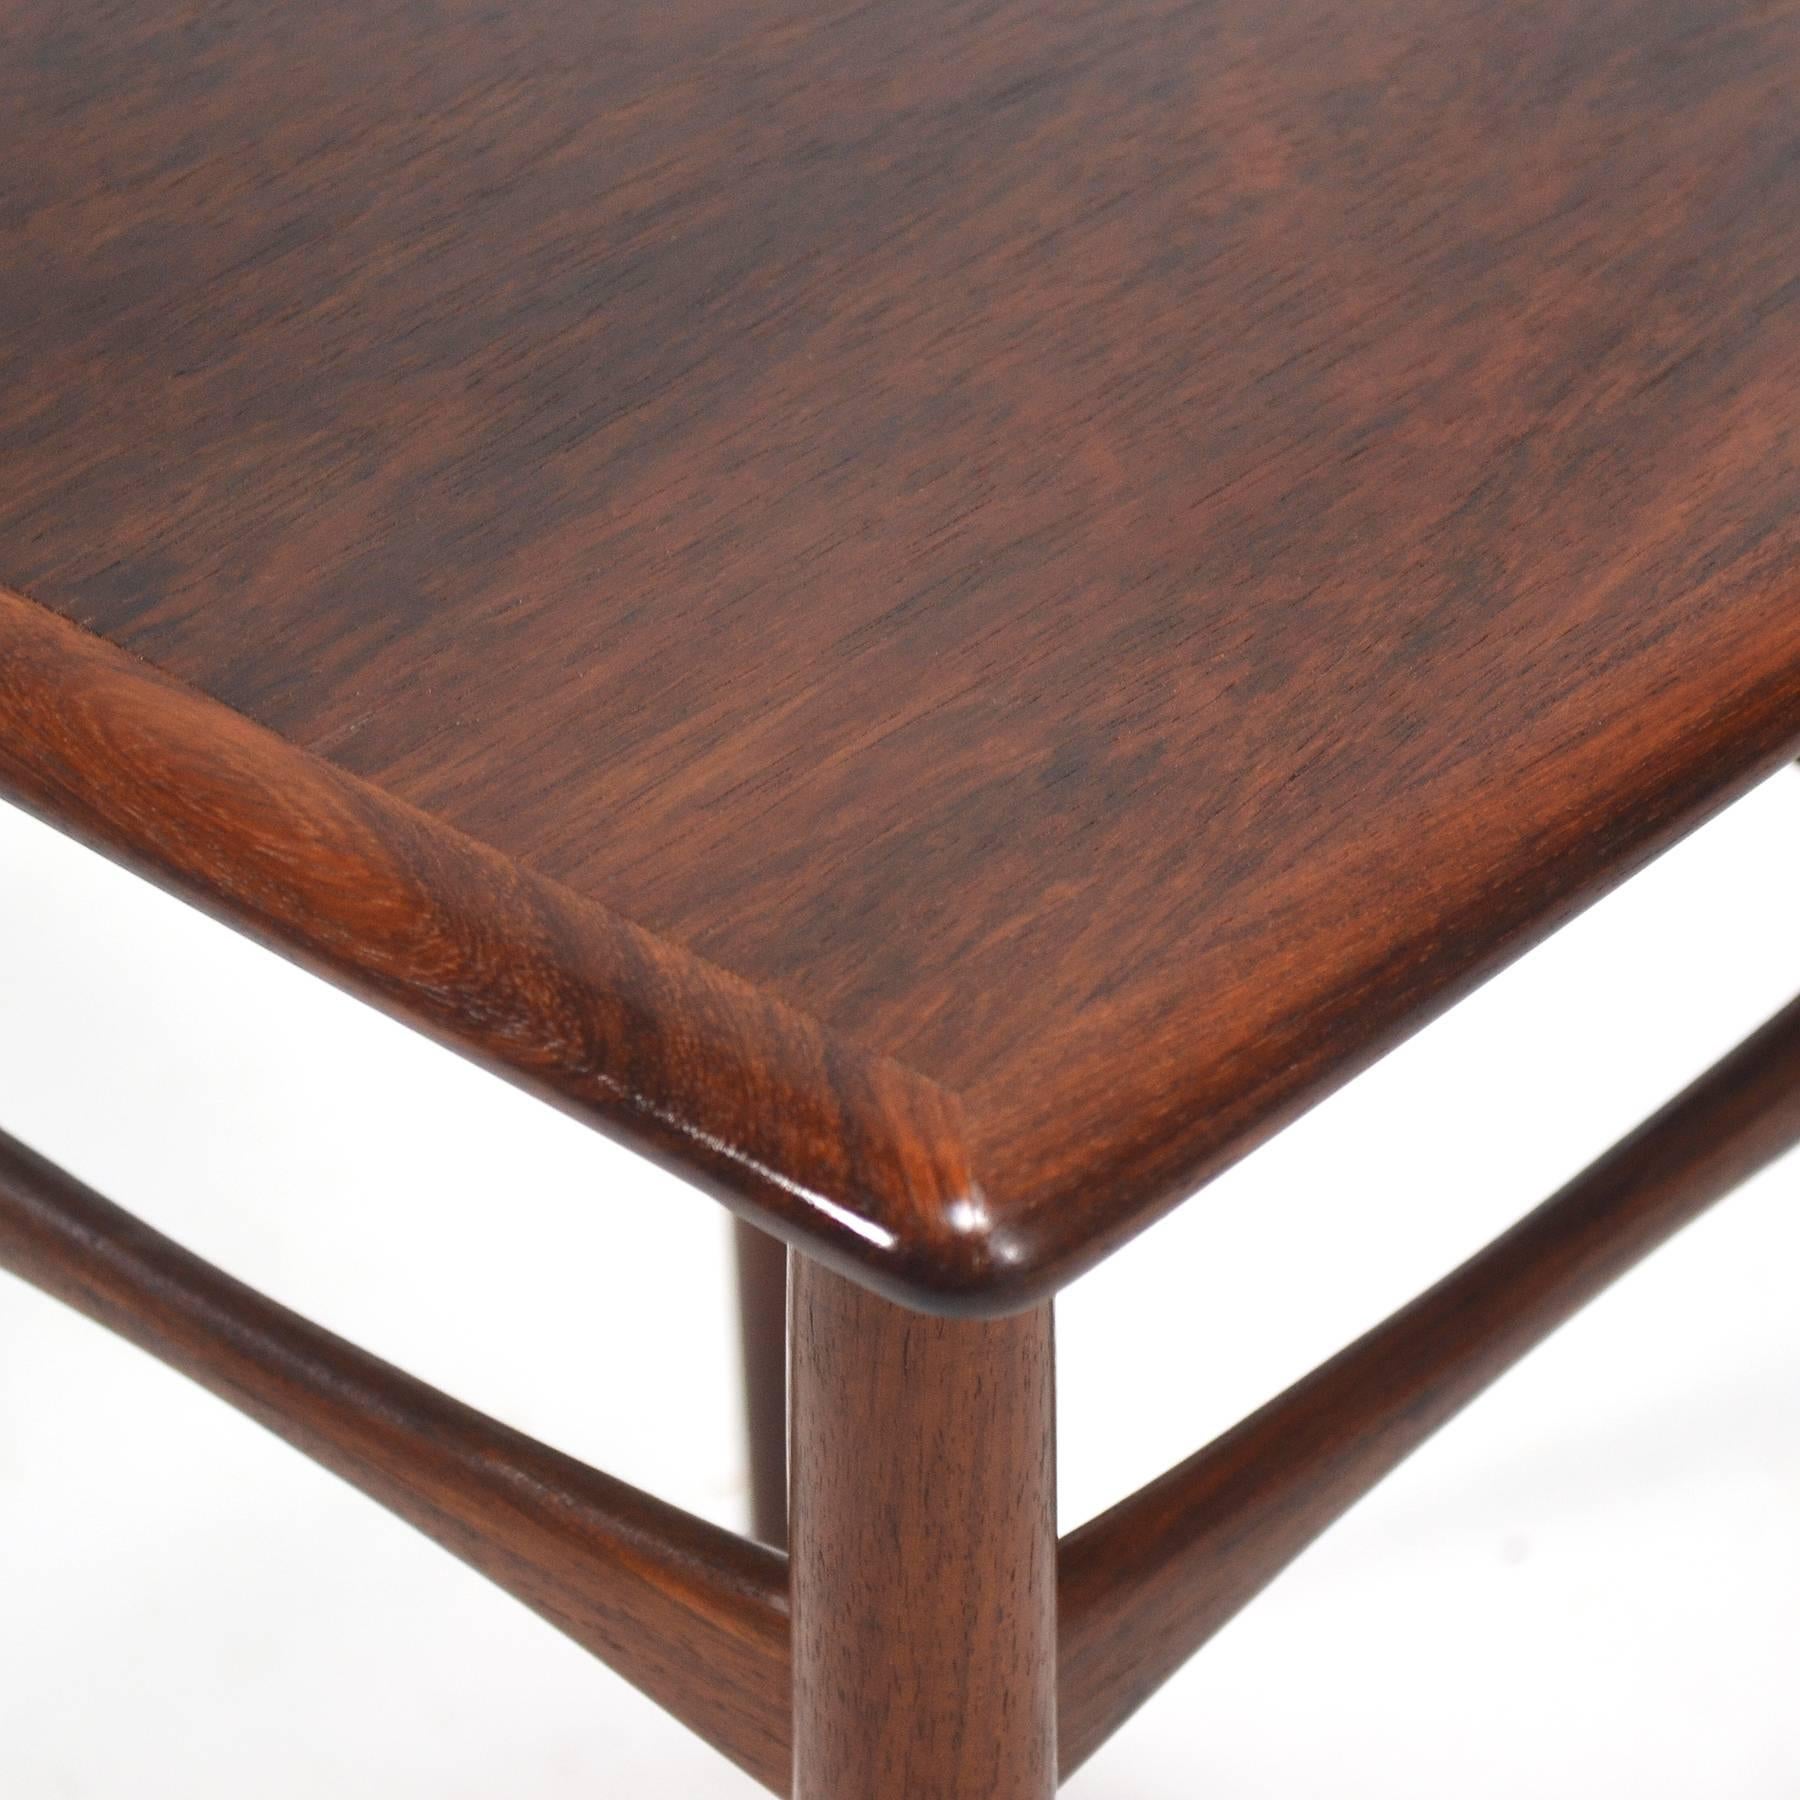 Arne Hovmand-Olsen Rosewood Side Table In Good Condition For Sale In Highland, IN